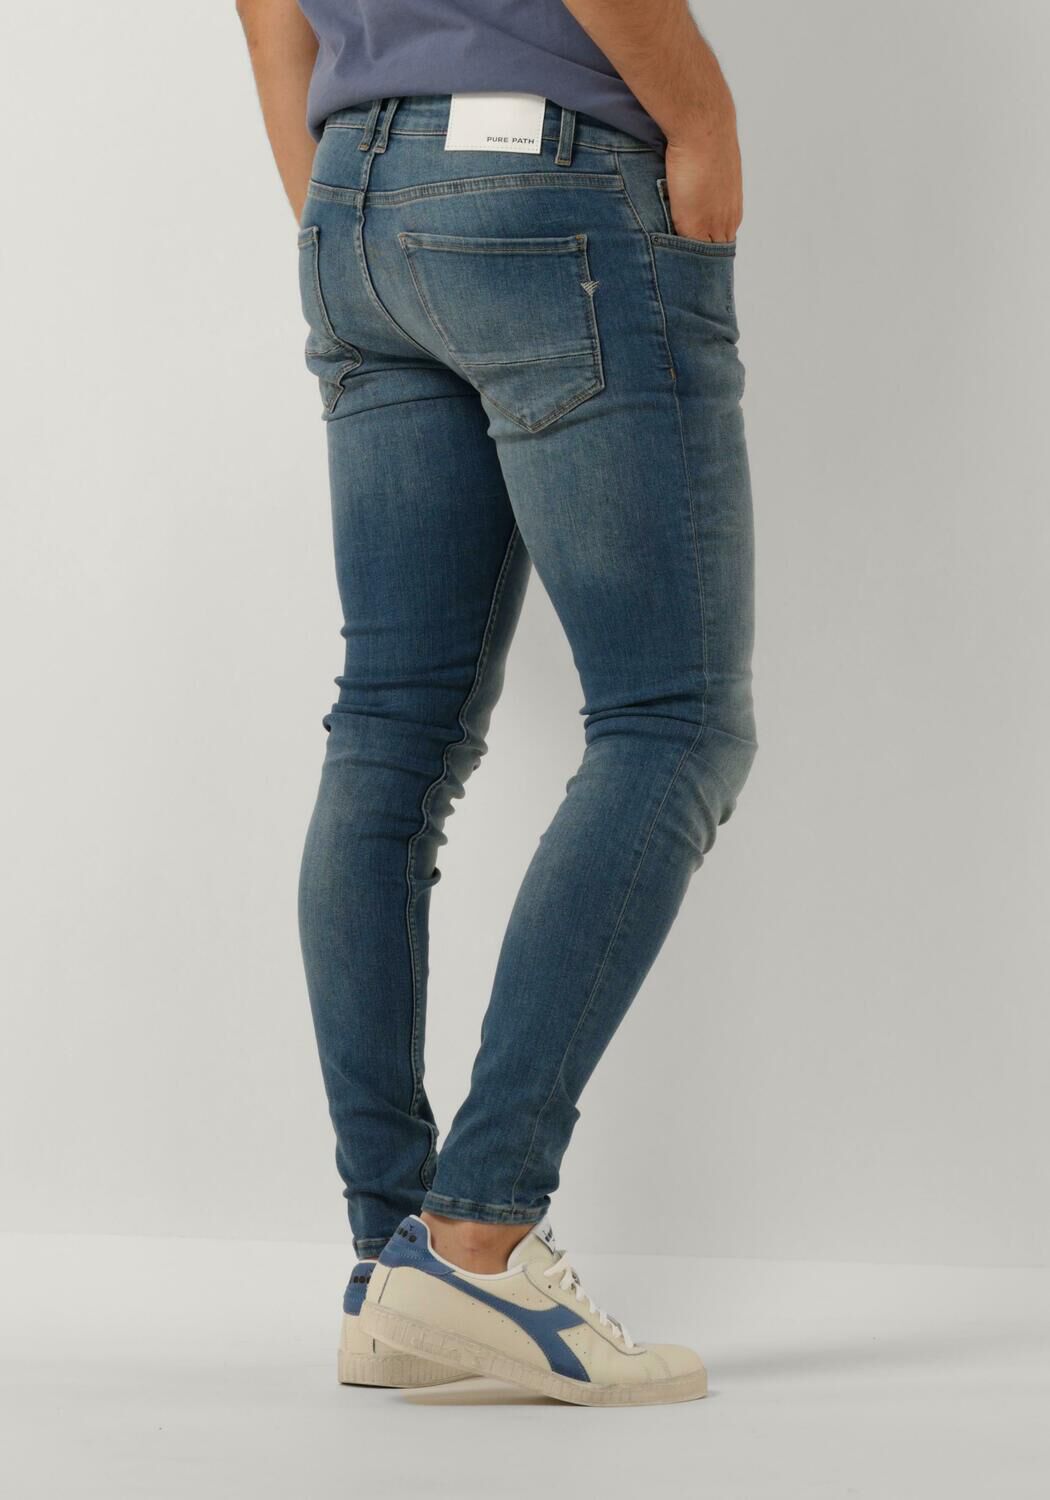 PURE PATH Heren Jeans W1201 The Dylan Blauw